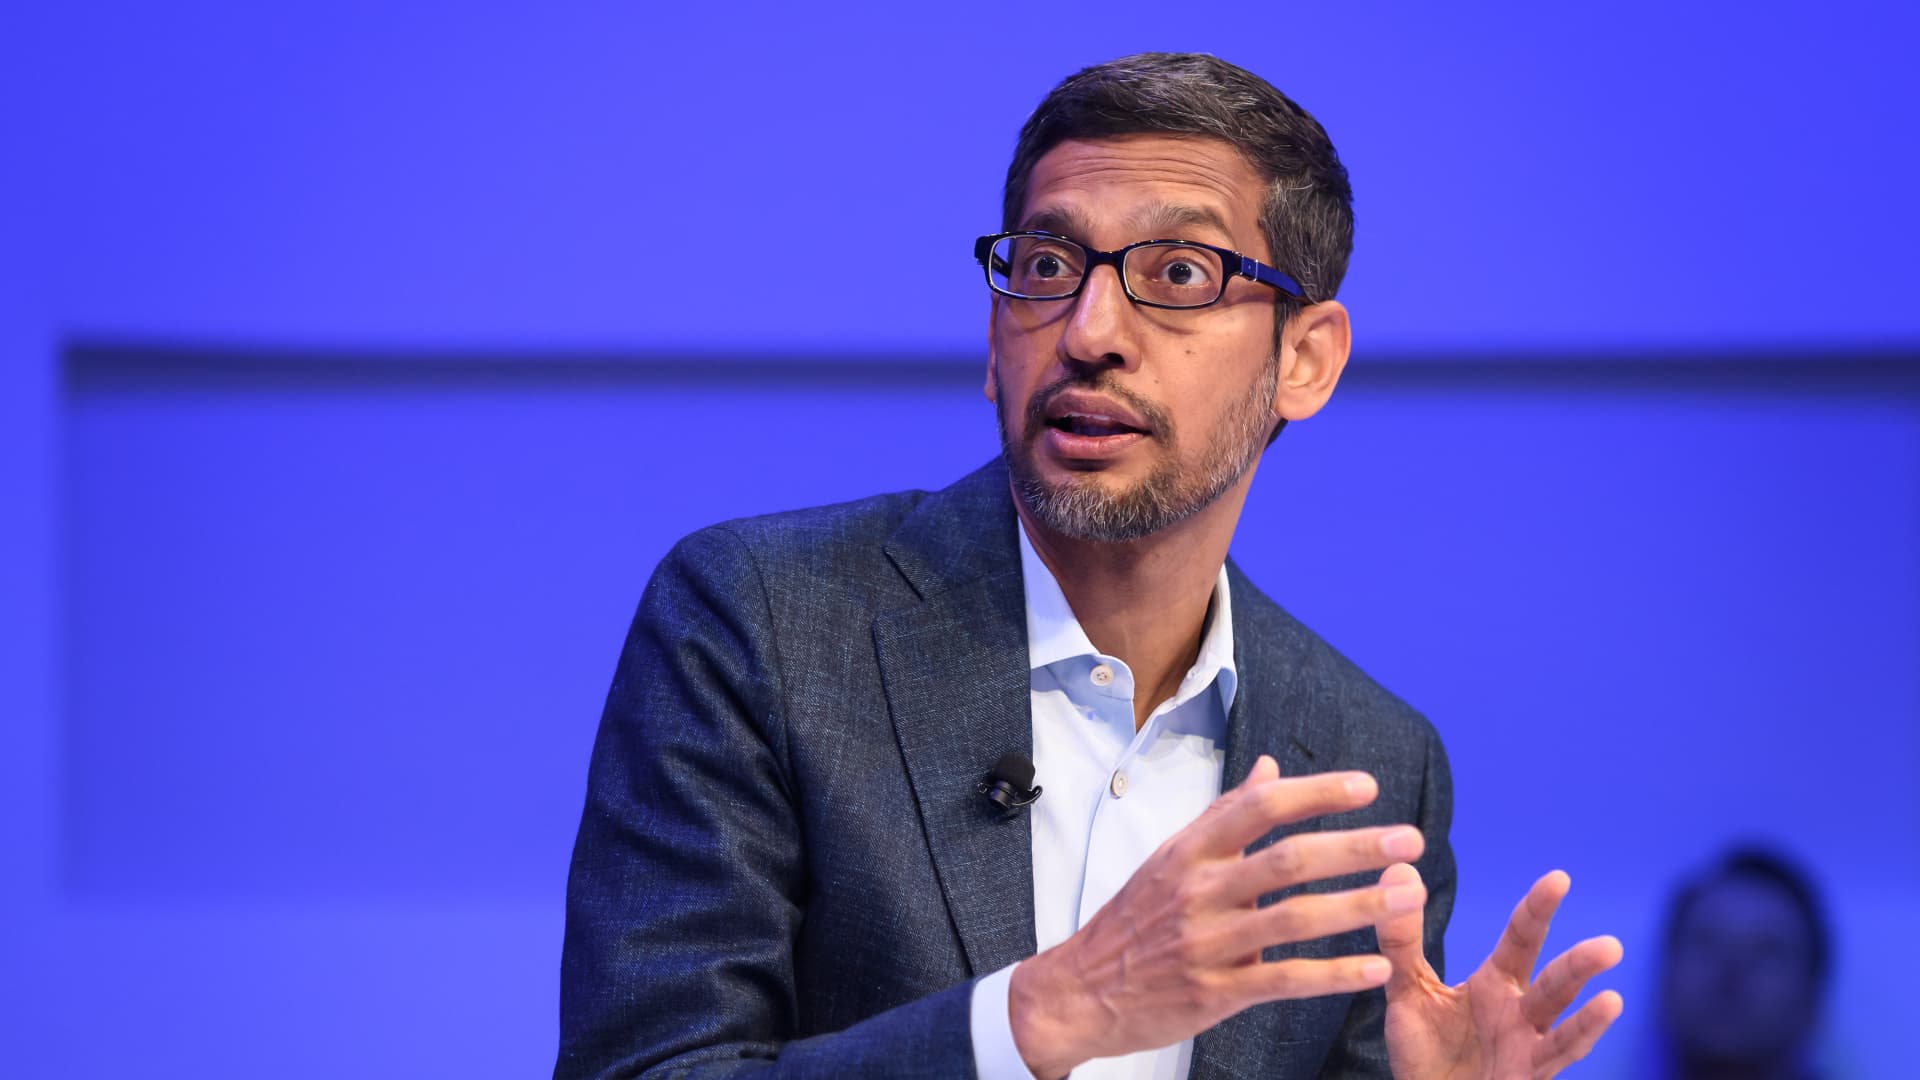 Google CEO defends desk-sharing policy, says offices like 'ghost town'